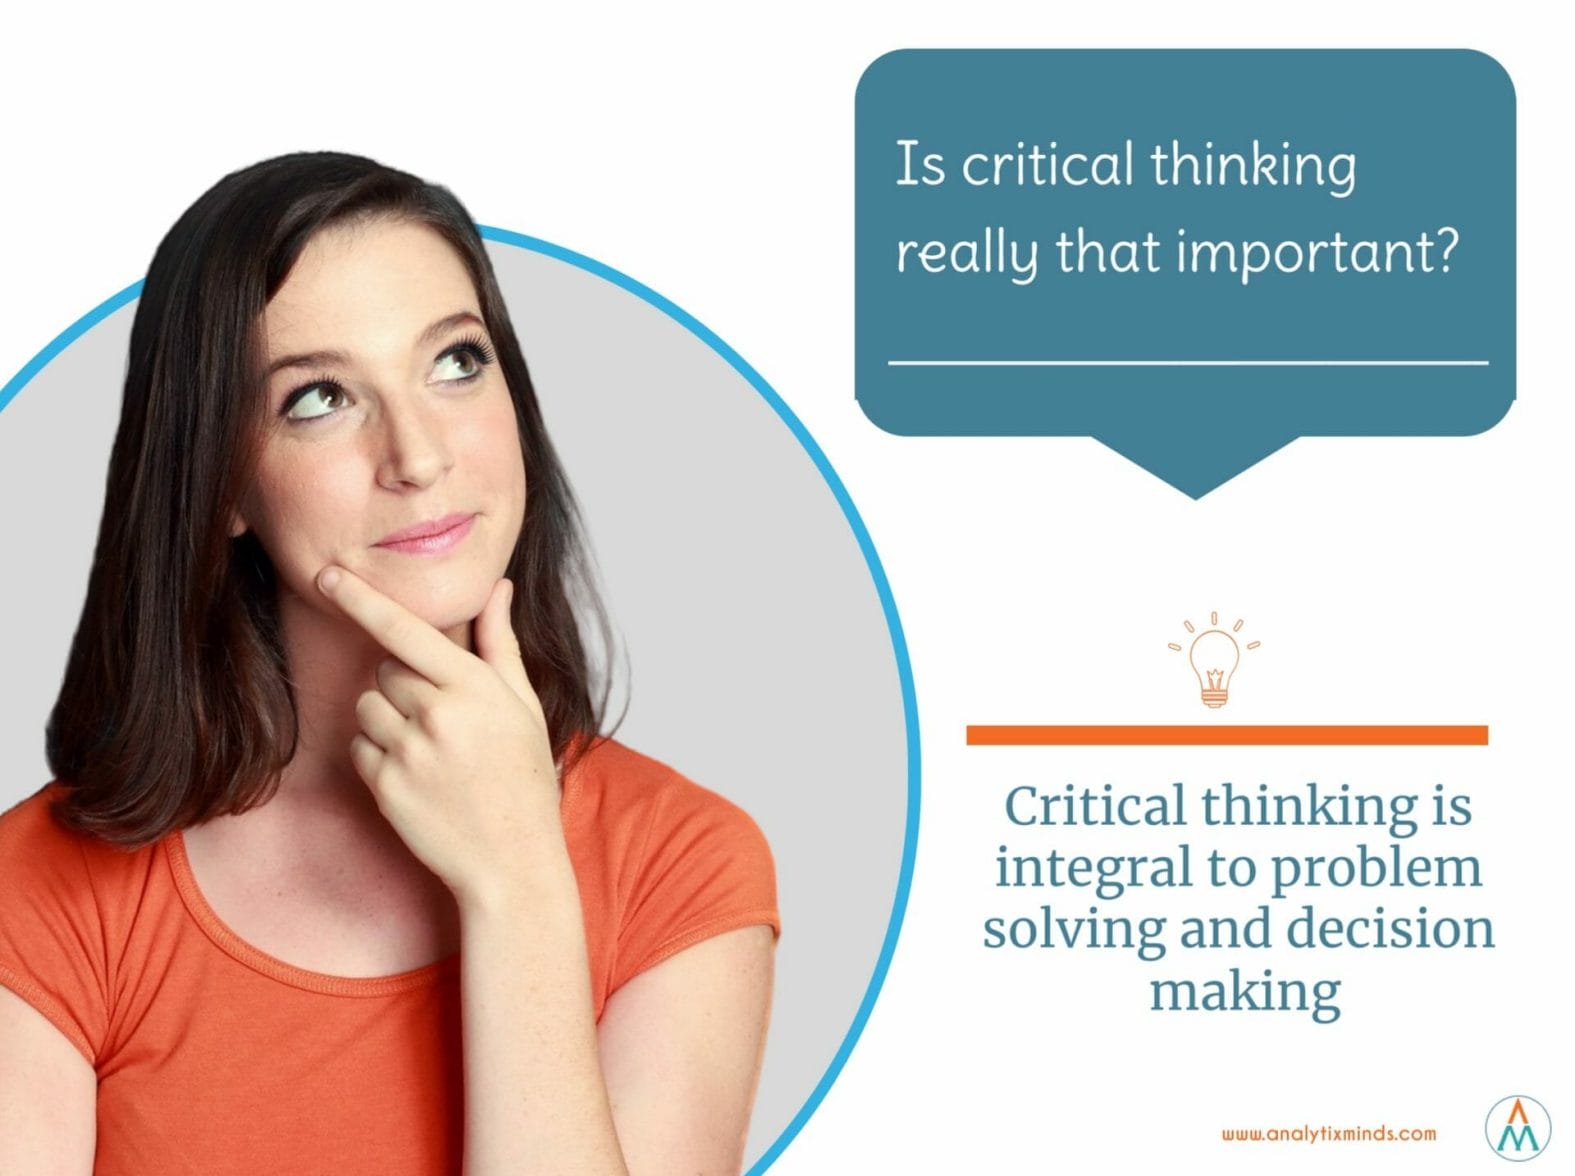 explain why critical thinking is important